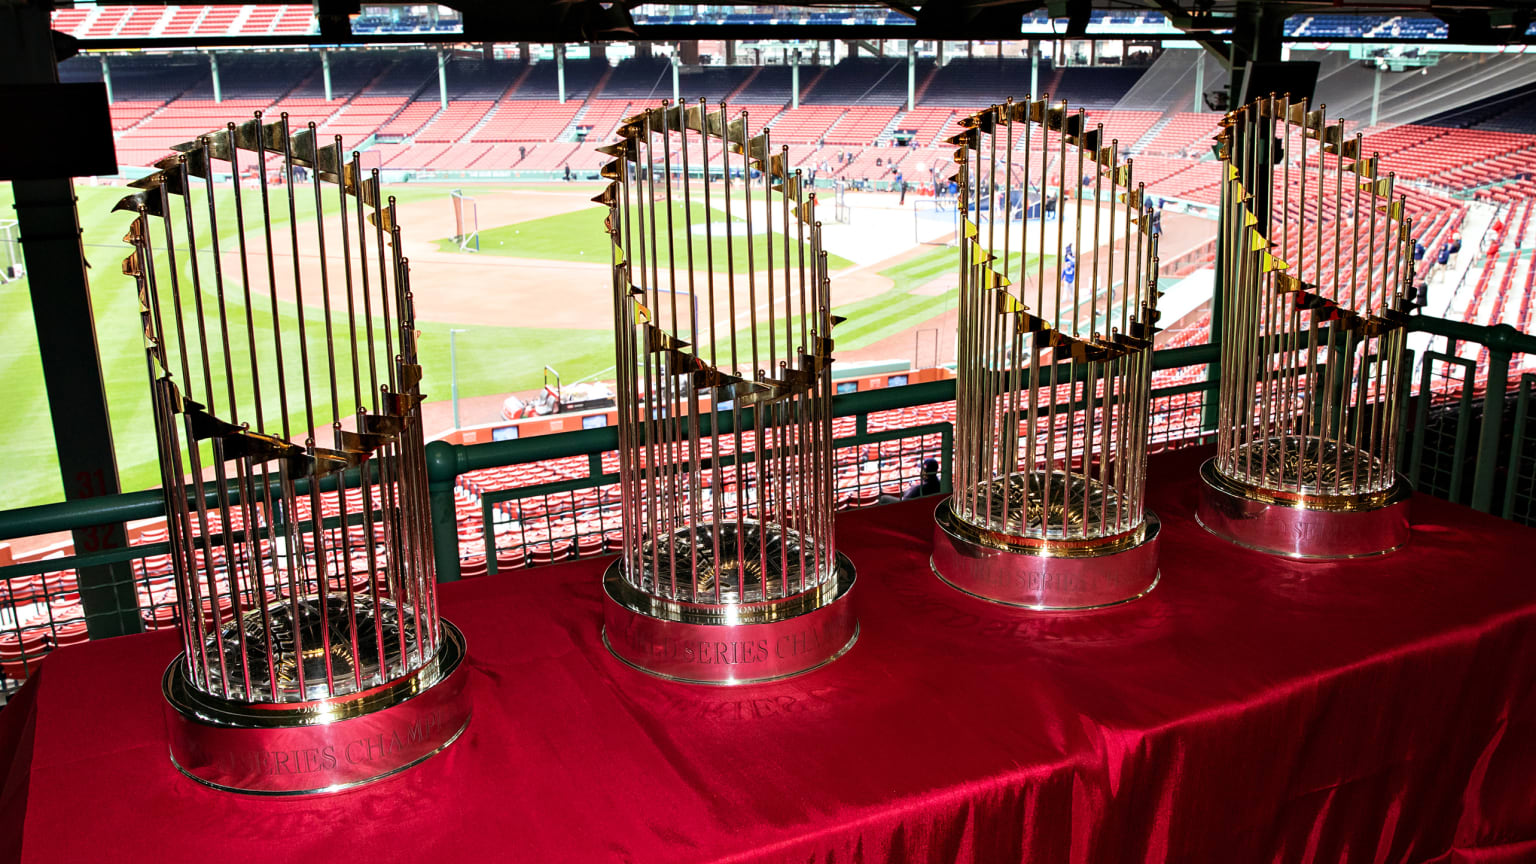 Red Sox World Series trophy to be on display at Worcester Festival of Lights